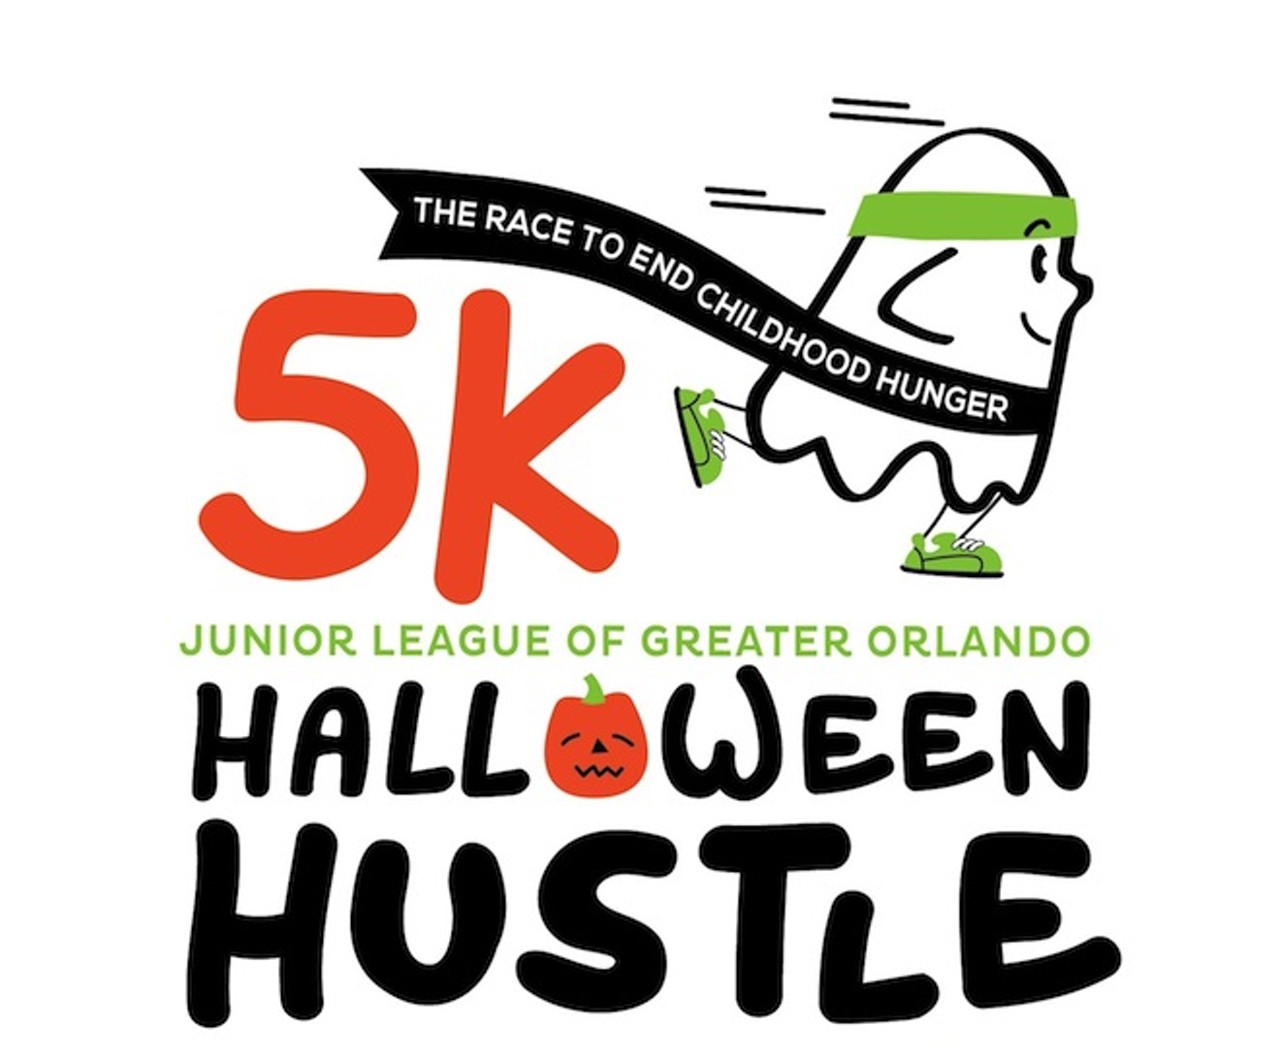 Oct. 24
Halloween Hustle 5K The Junior League of Greater Orlando hosts a kids fun run and 5K run/walk, complete with live music and more. 6-9 p.m. Thursday; Baldwin Park, New Broad and Jake streets; free; 386-216-1602.